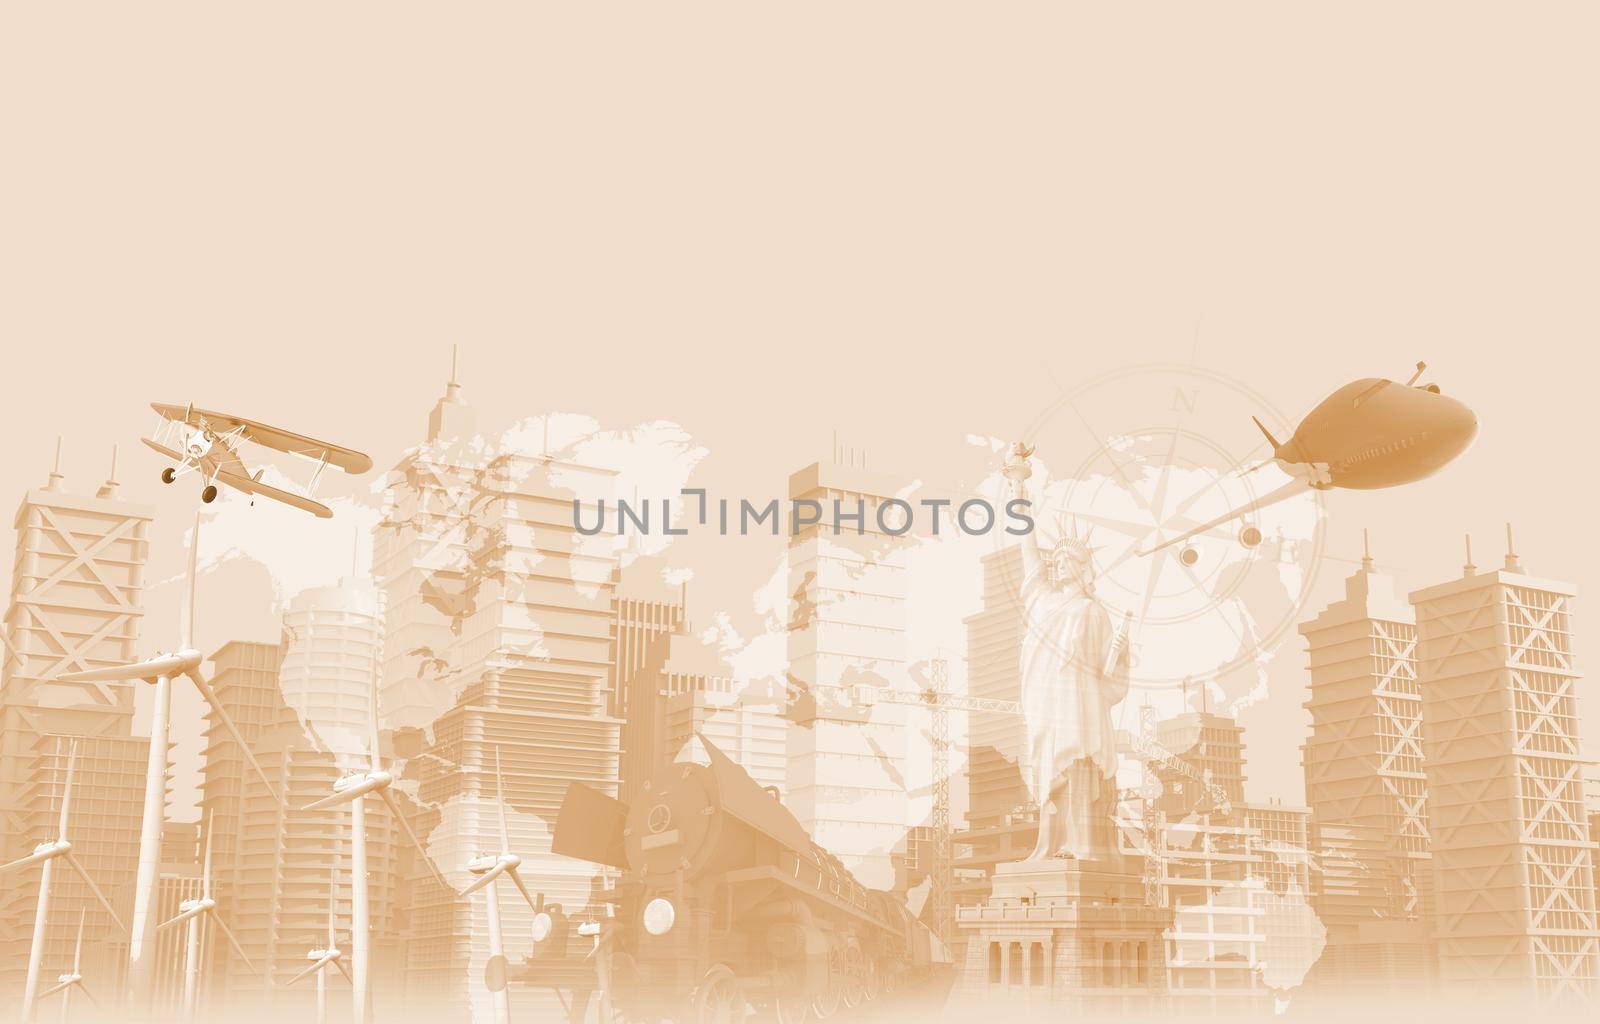 Travel Conceptual Background Illustration. Cityscape, Statue of Liberty, Biplane, Jet Airplane, Steam Locomotive and World Map Overlay.